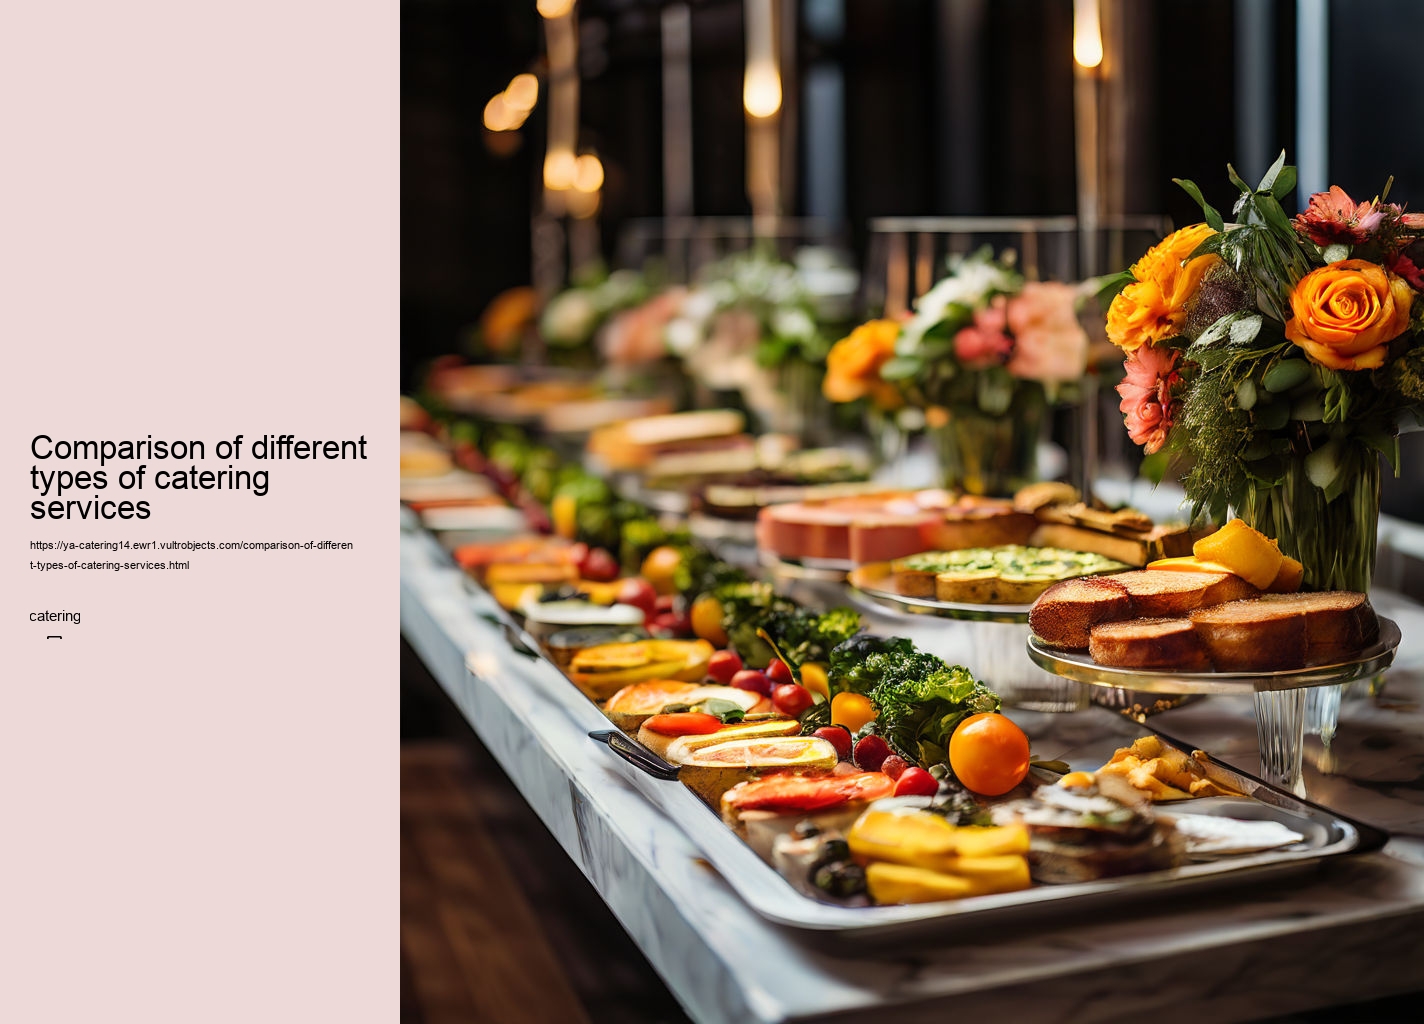 Comparison of different types of catering services